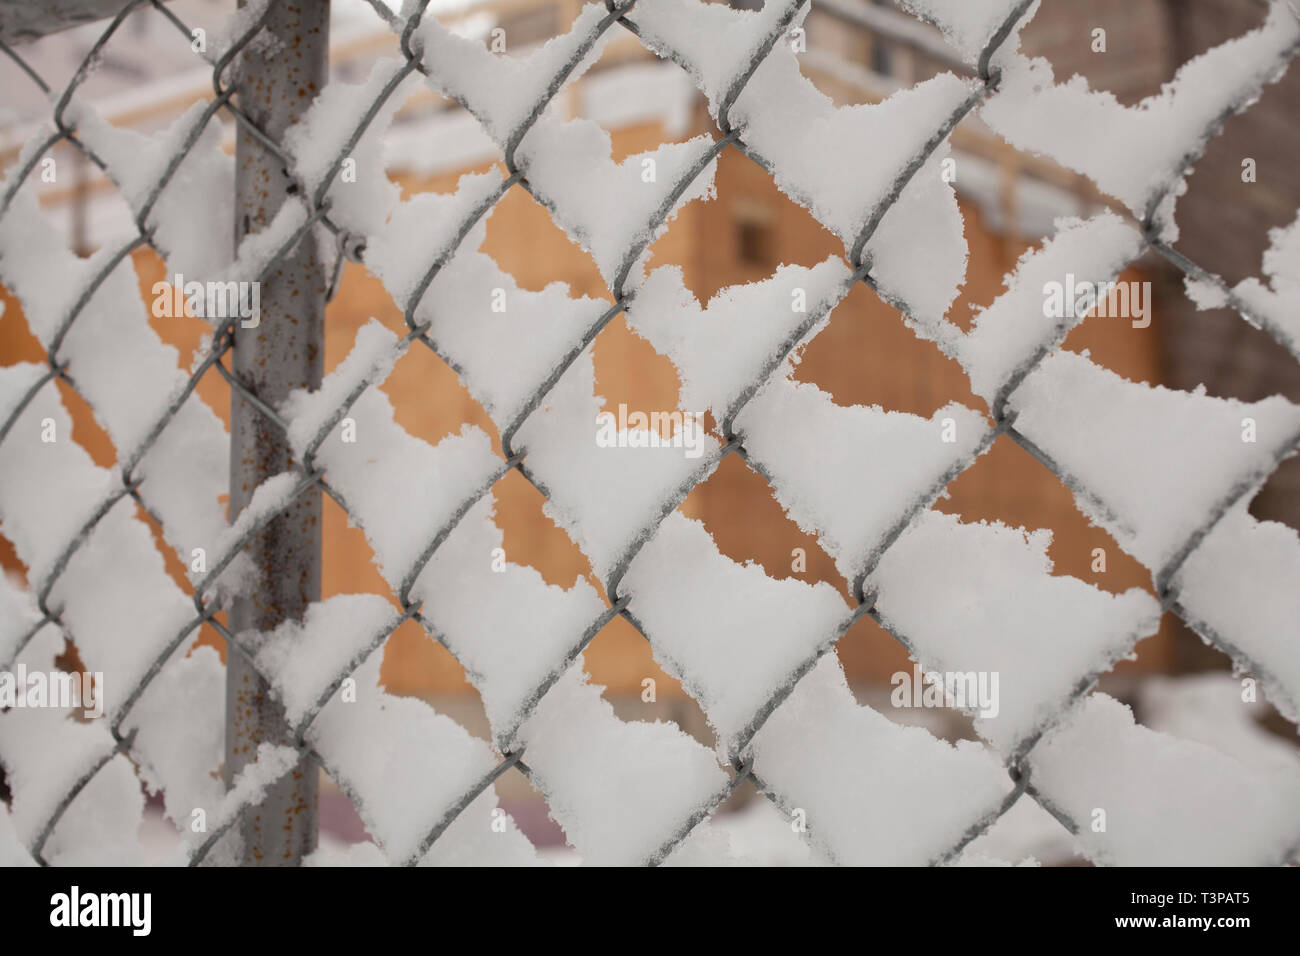 Close-up of chain link fence in winter snow. Stock Photo